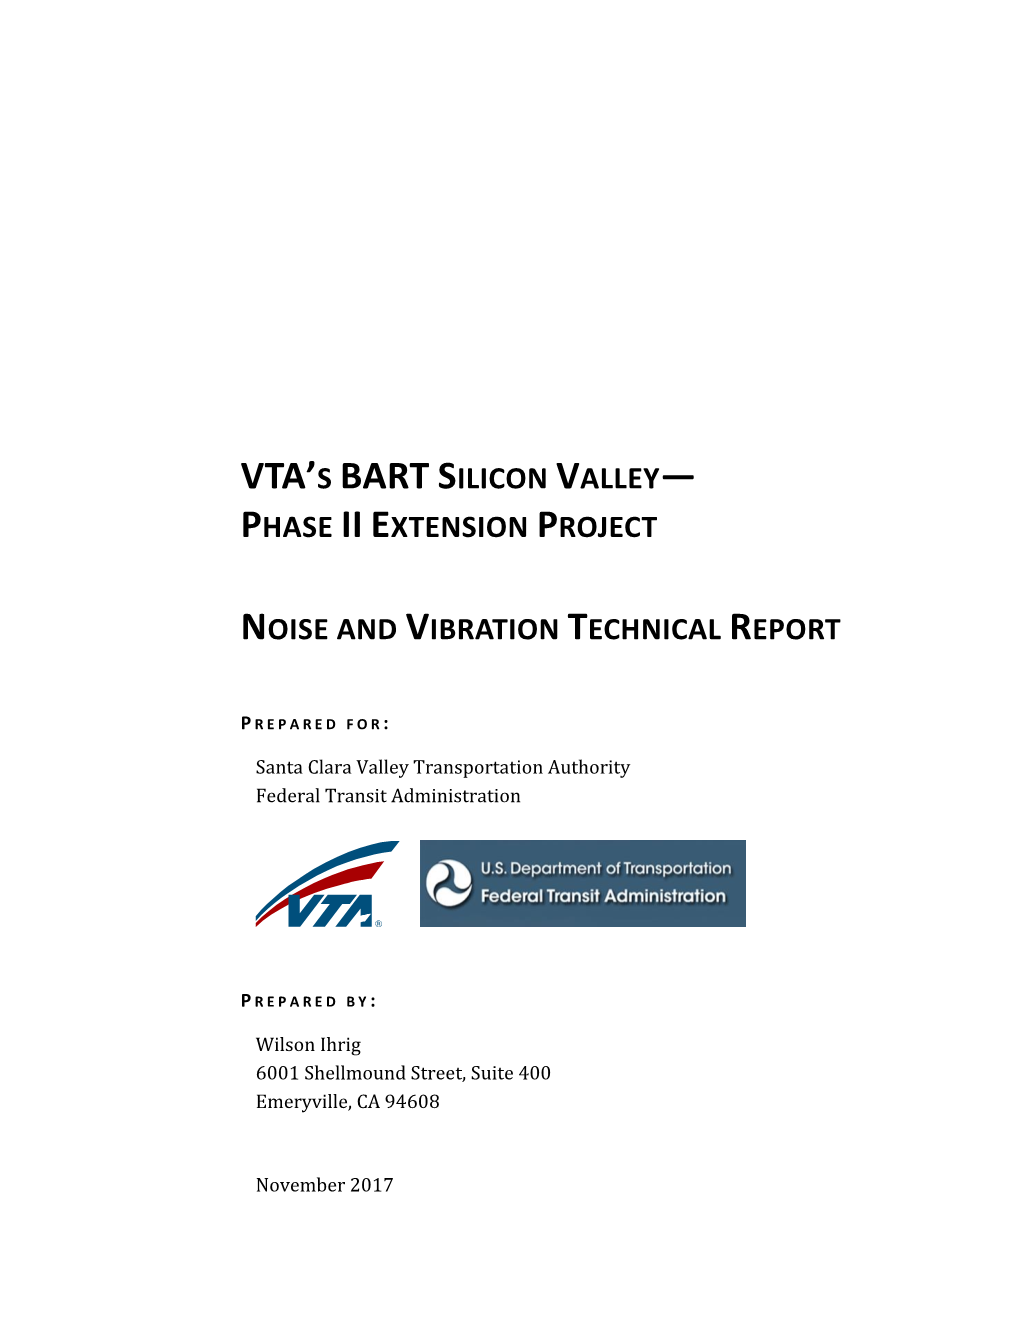 Noise and Vibration Technical Report